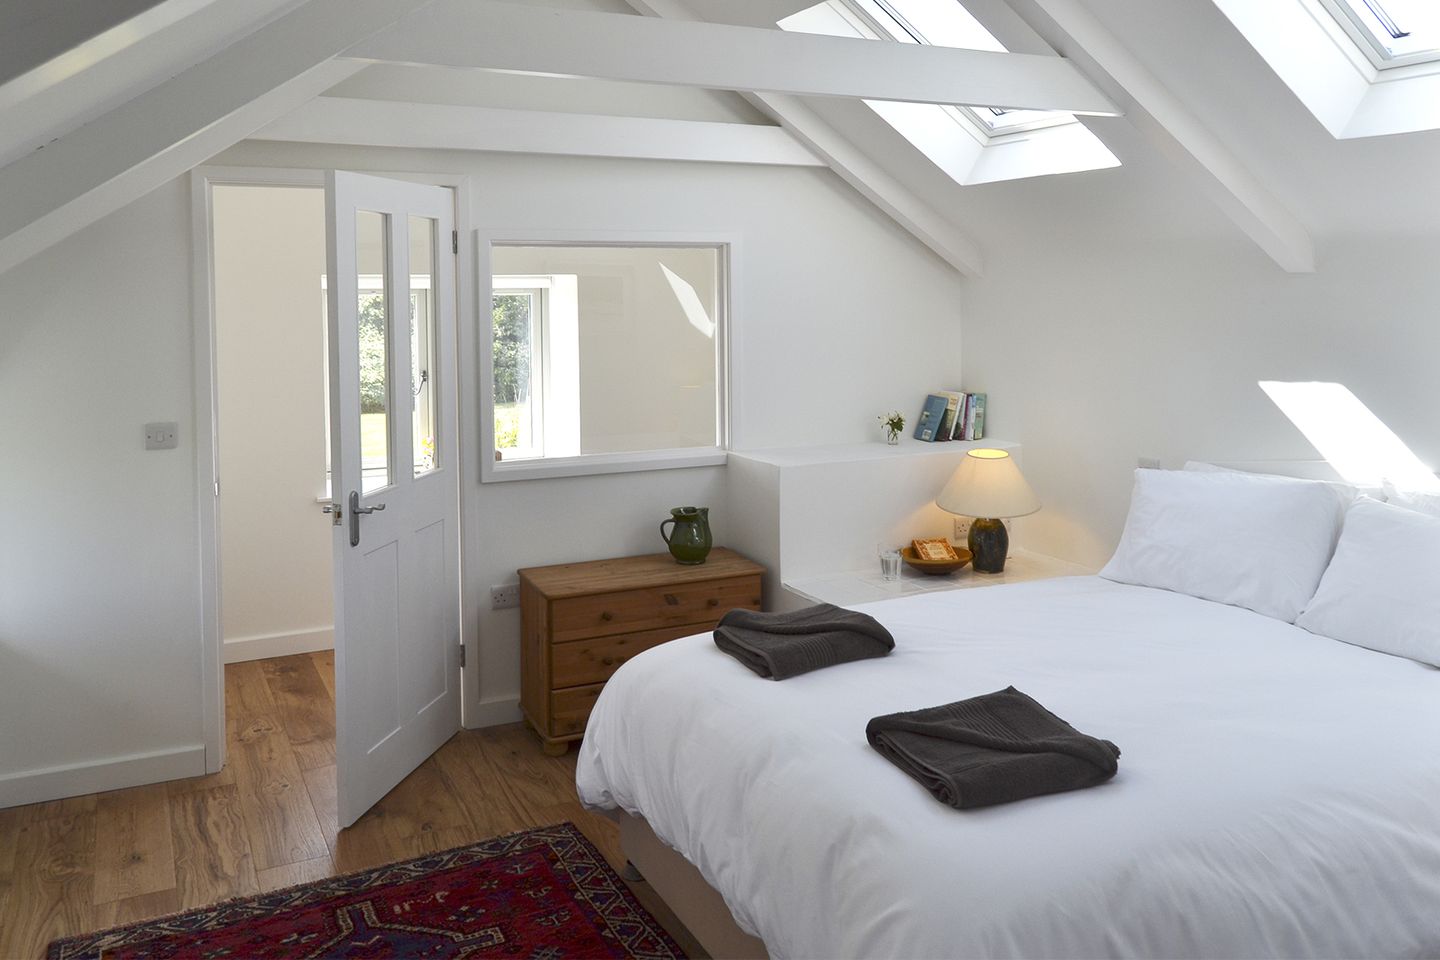 The Studio Rinsey Cove Holiday Double Bedroom